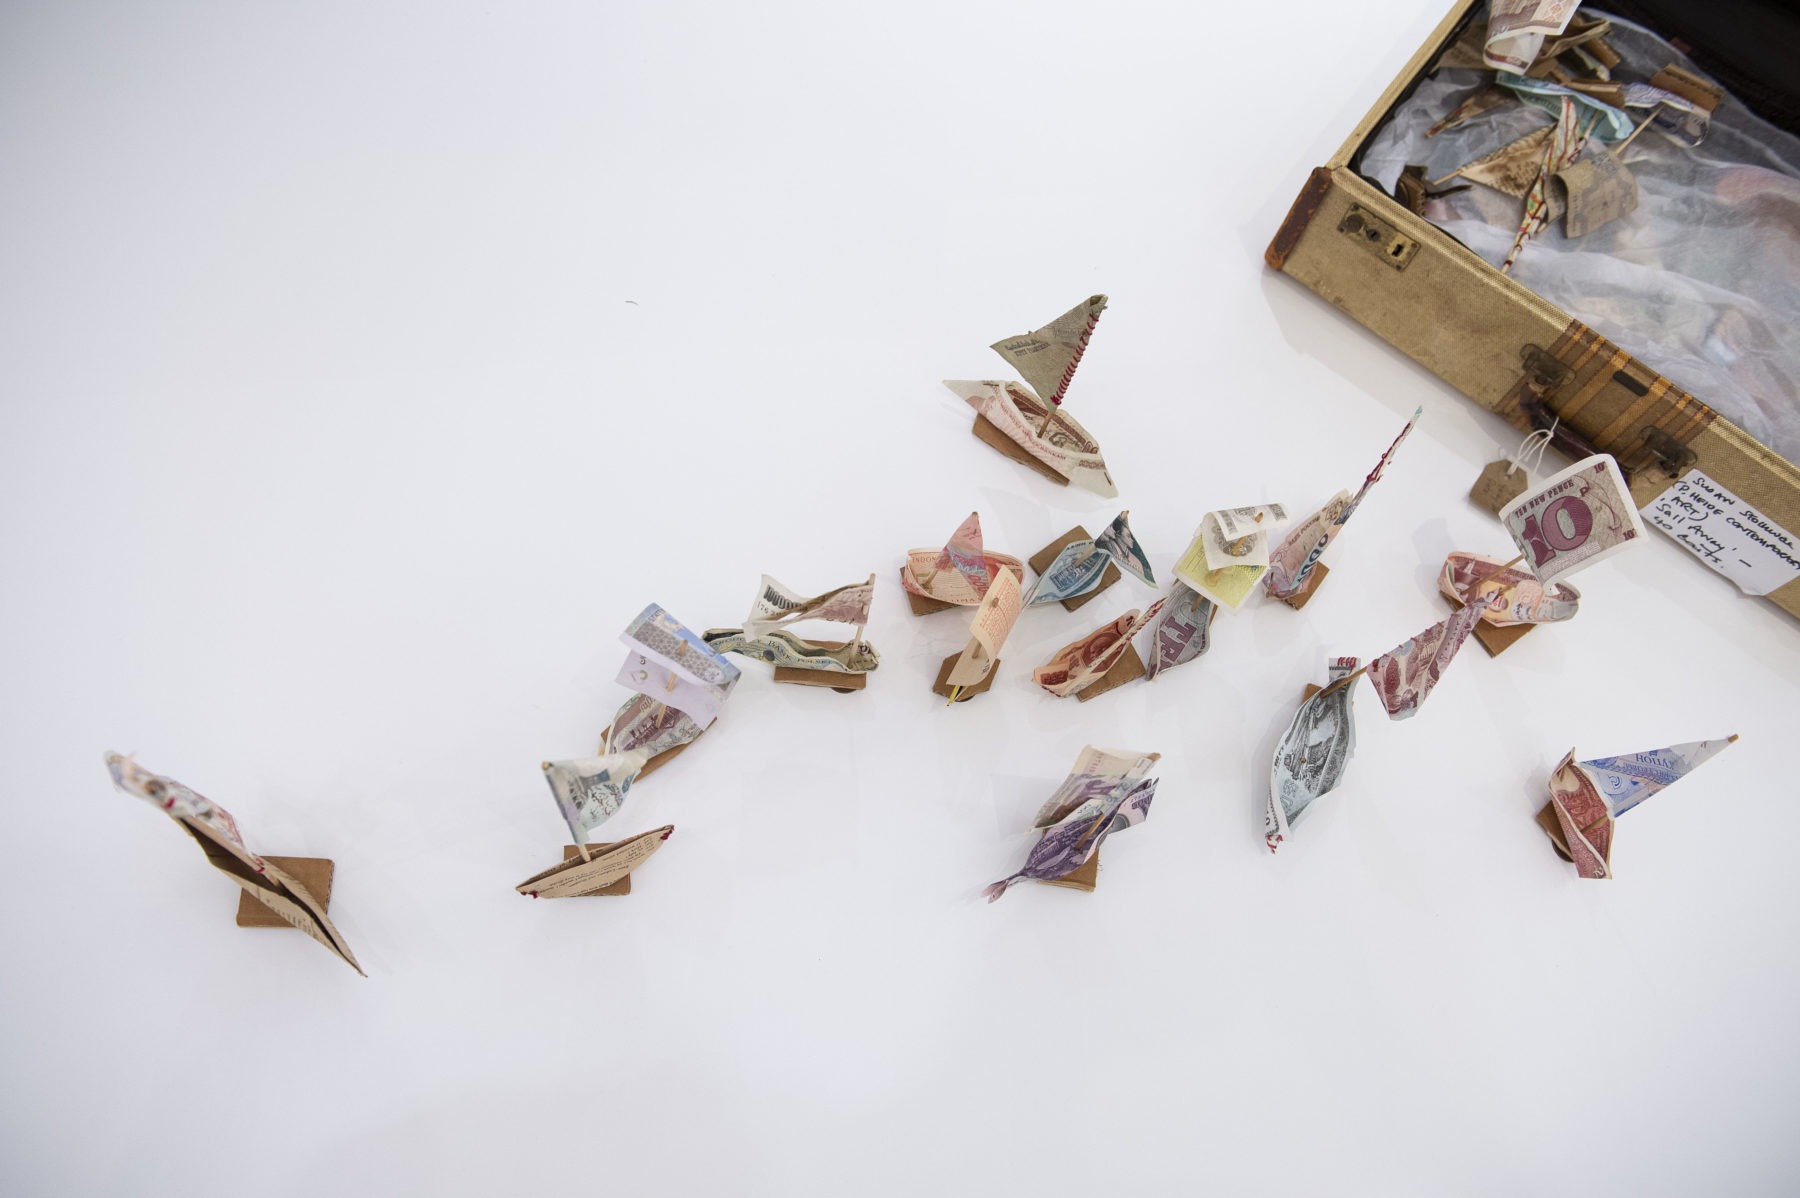 Small boat made of money bills for The Sea is the Limit art exhibition by Susan Stockwell at VCUarts Qatar